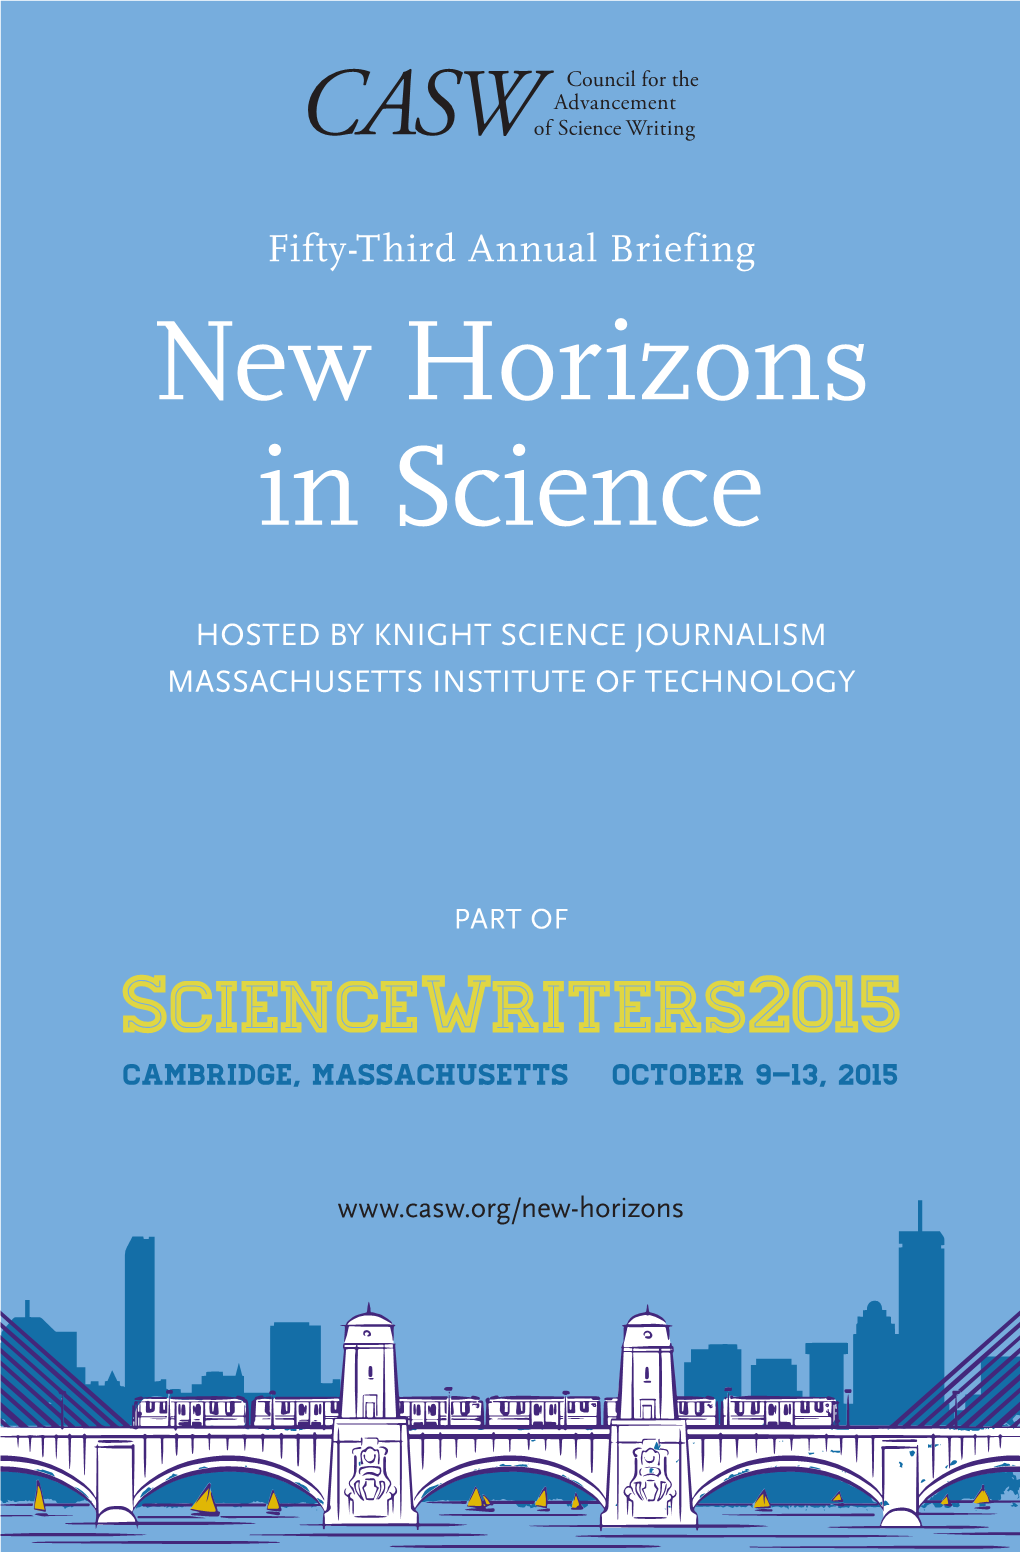 New Horizons in Science